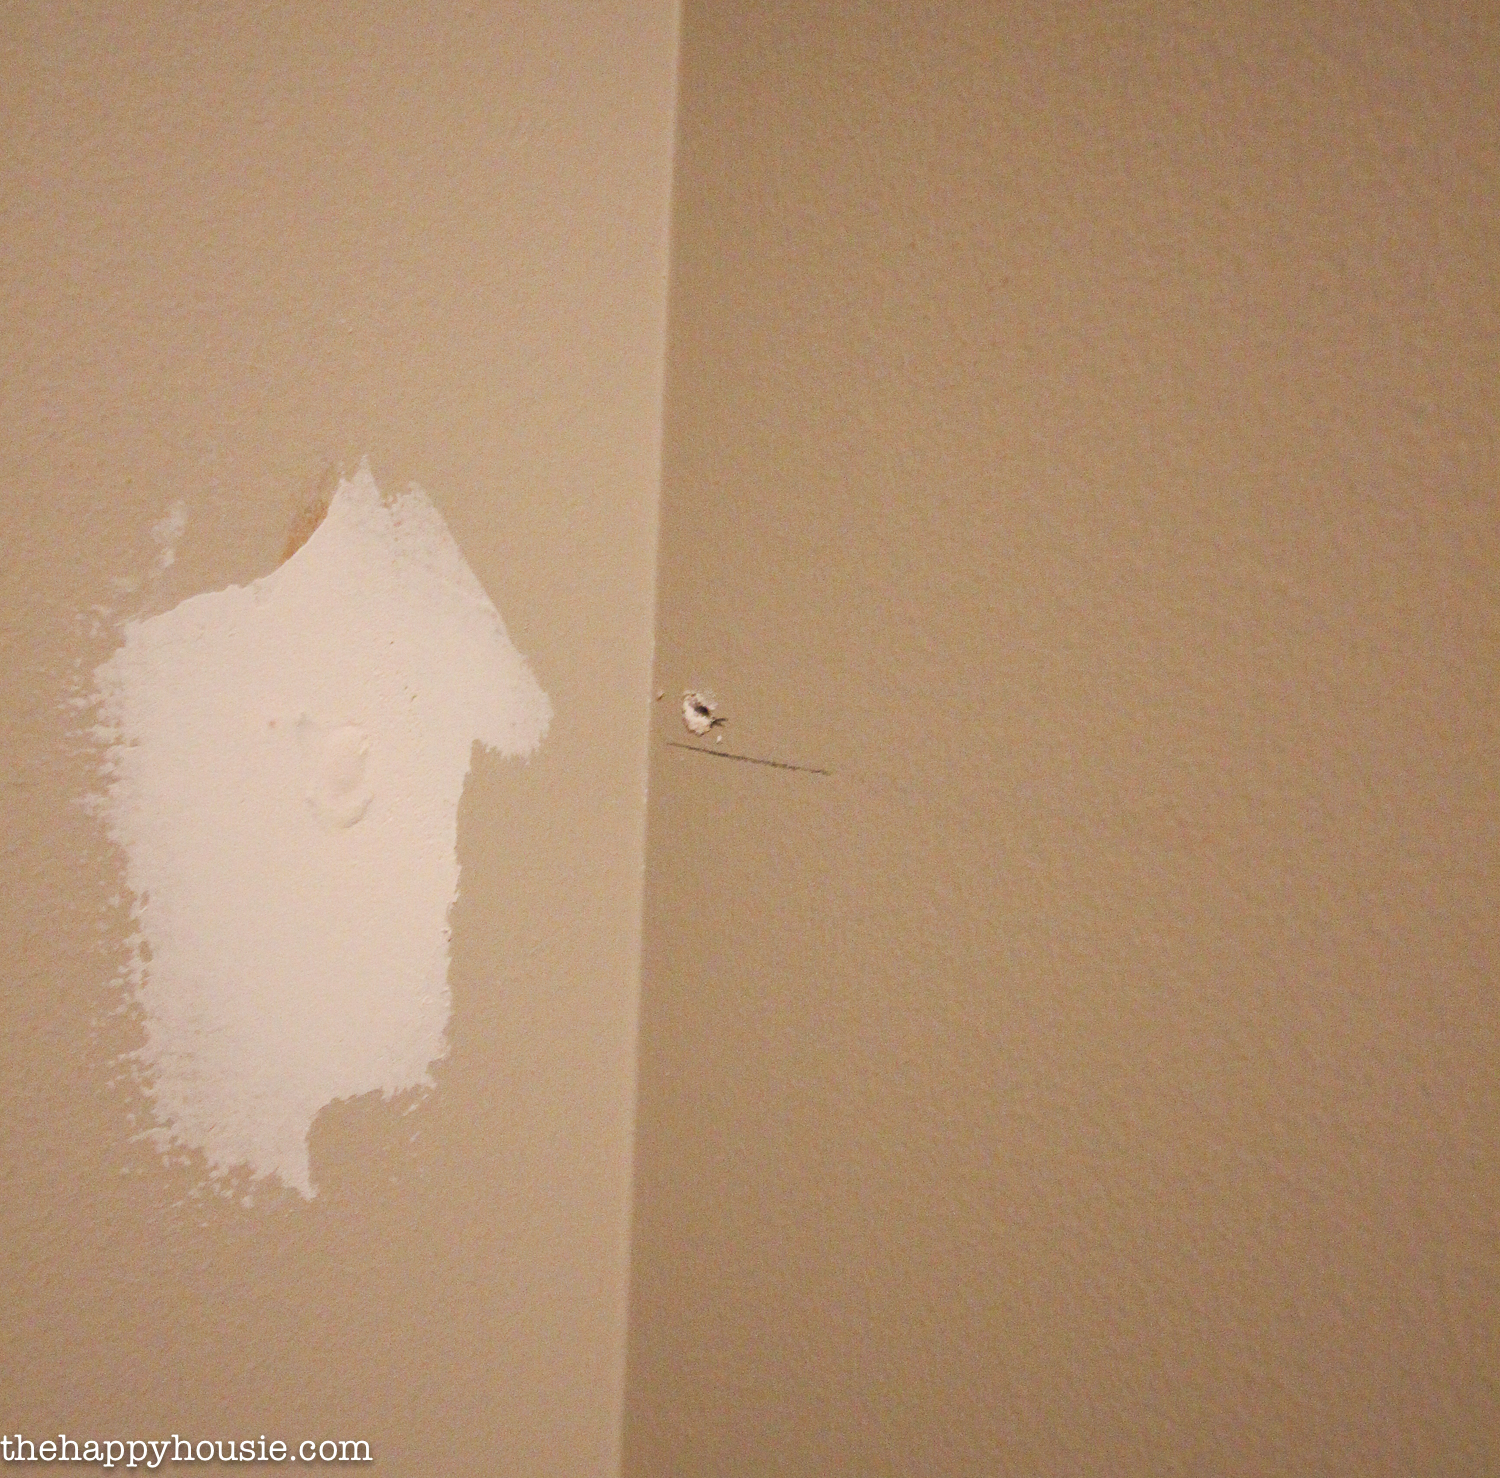 Patching holes in the wall.